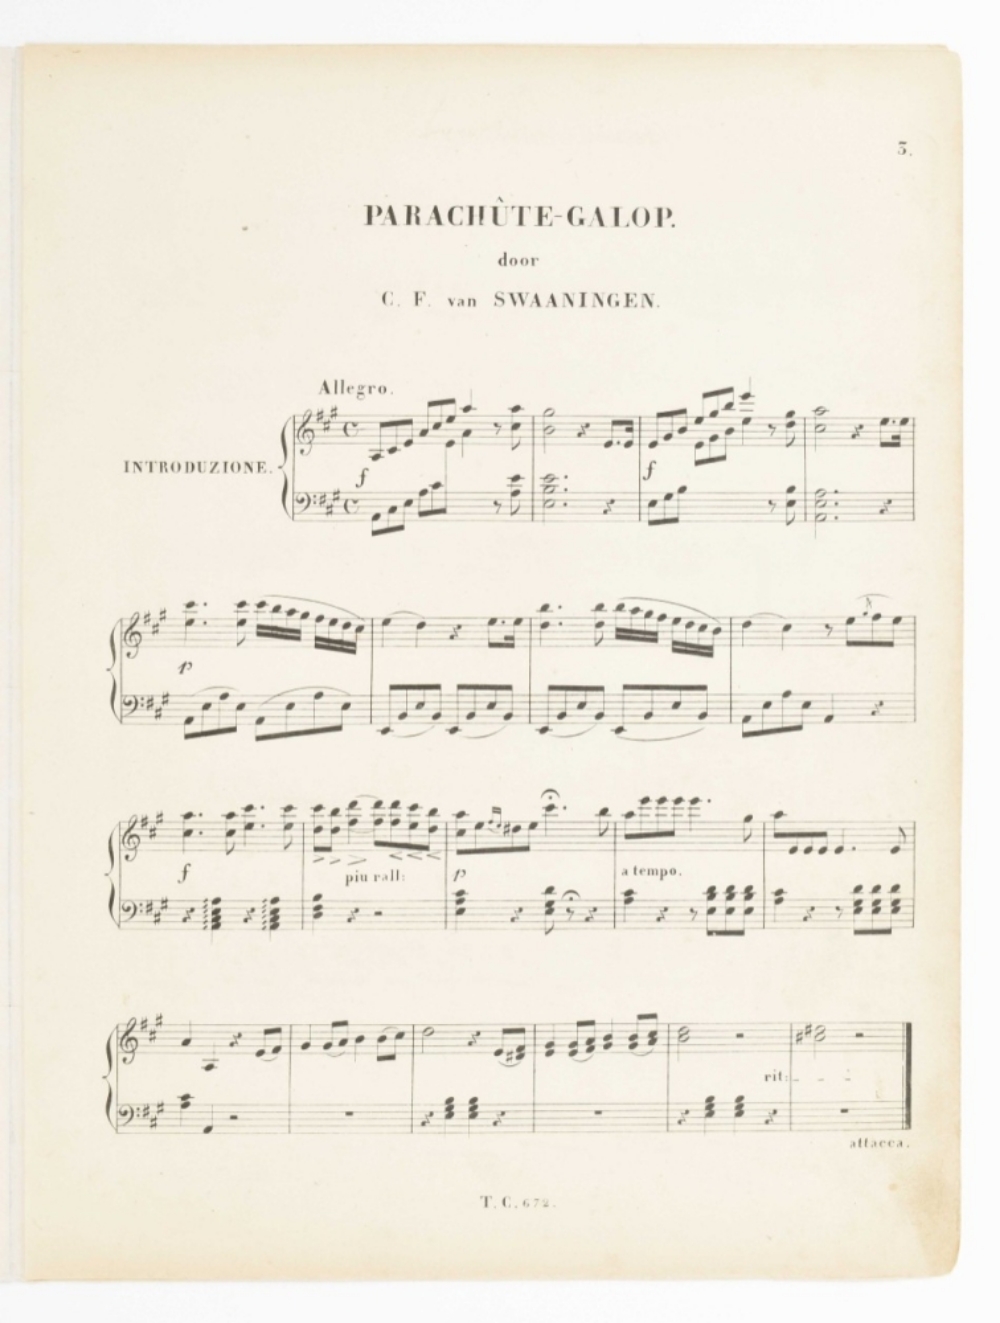 Collection of sheet music about airplanes, - Image 5 of 7